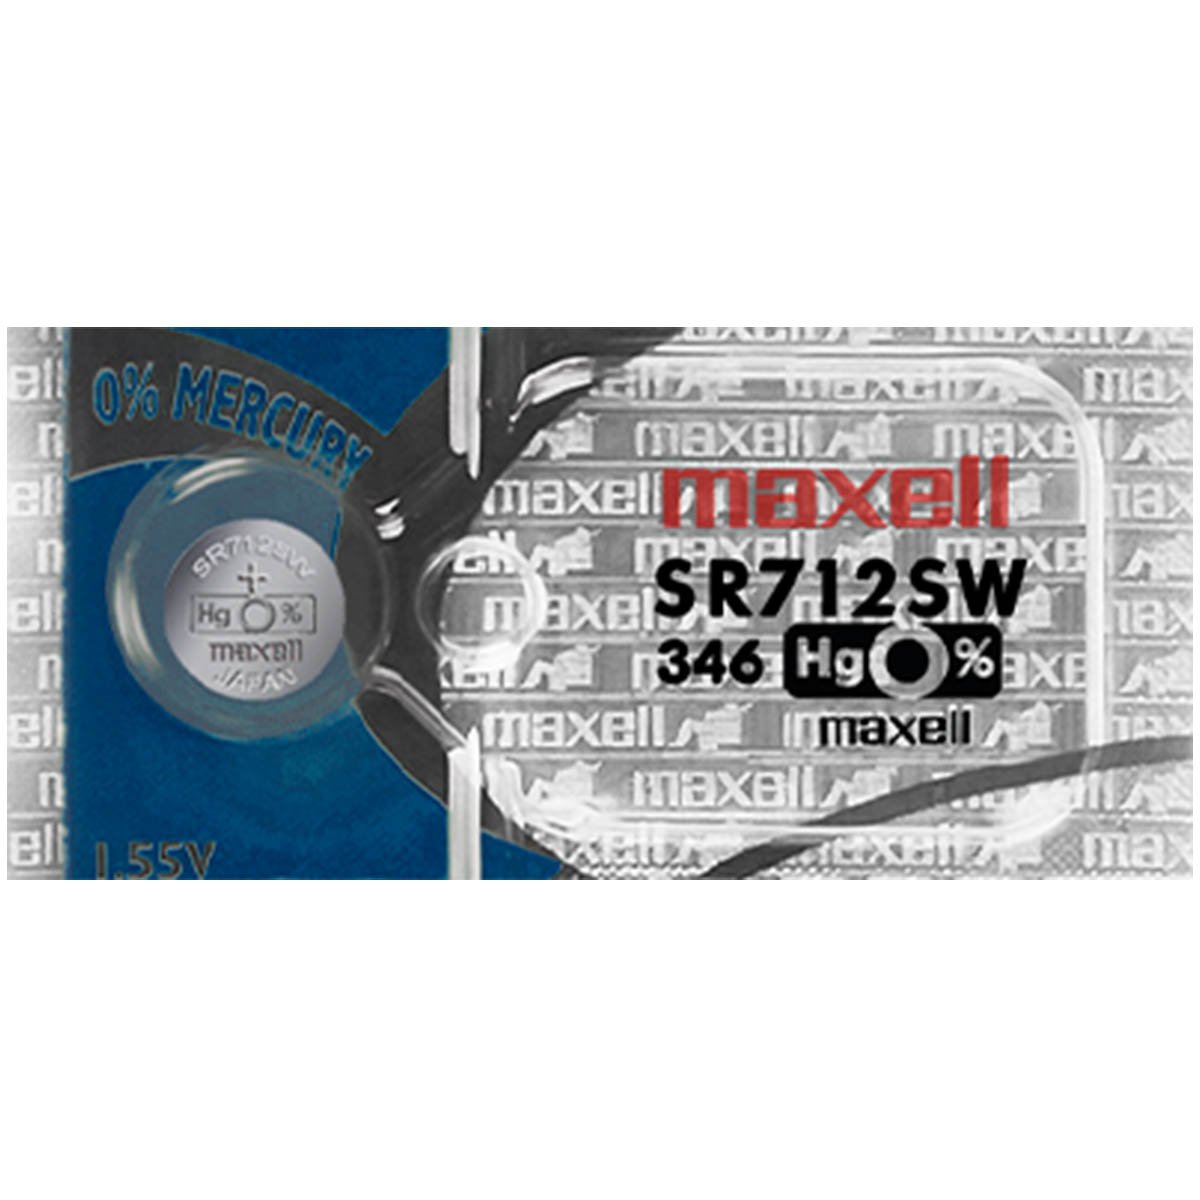 Maxell 346  Watch Battery (SR712SW) Silver Oxide 1.55V